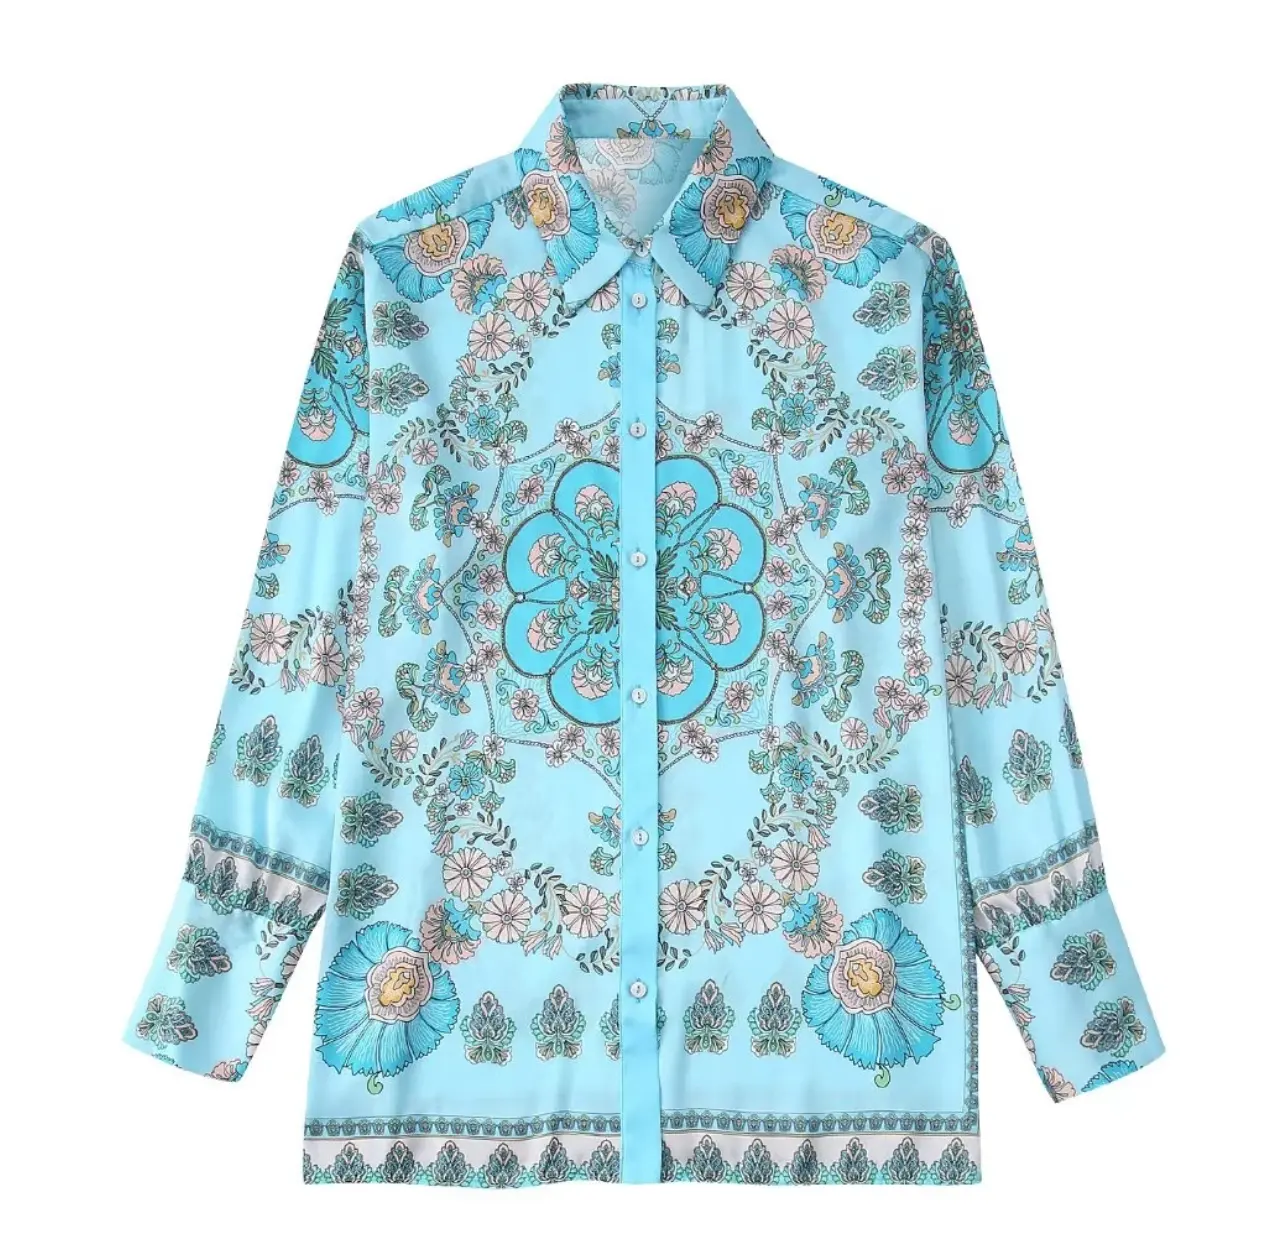 New Arrivals Women's Long Sleeve Shirts Floral Printing Loose Button Down Blouse